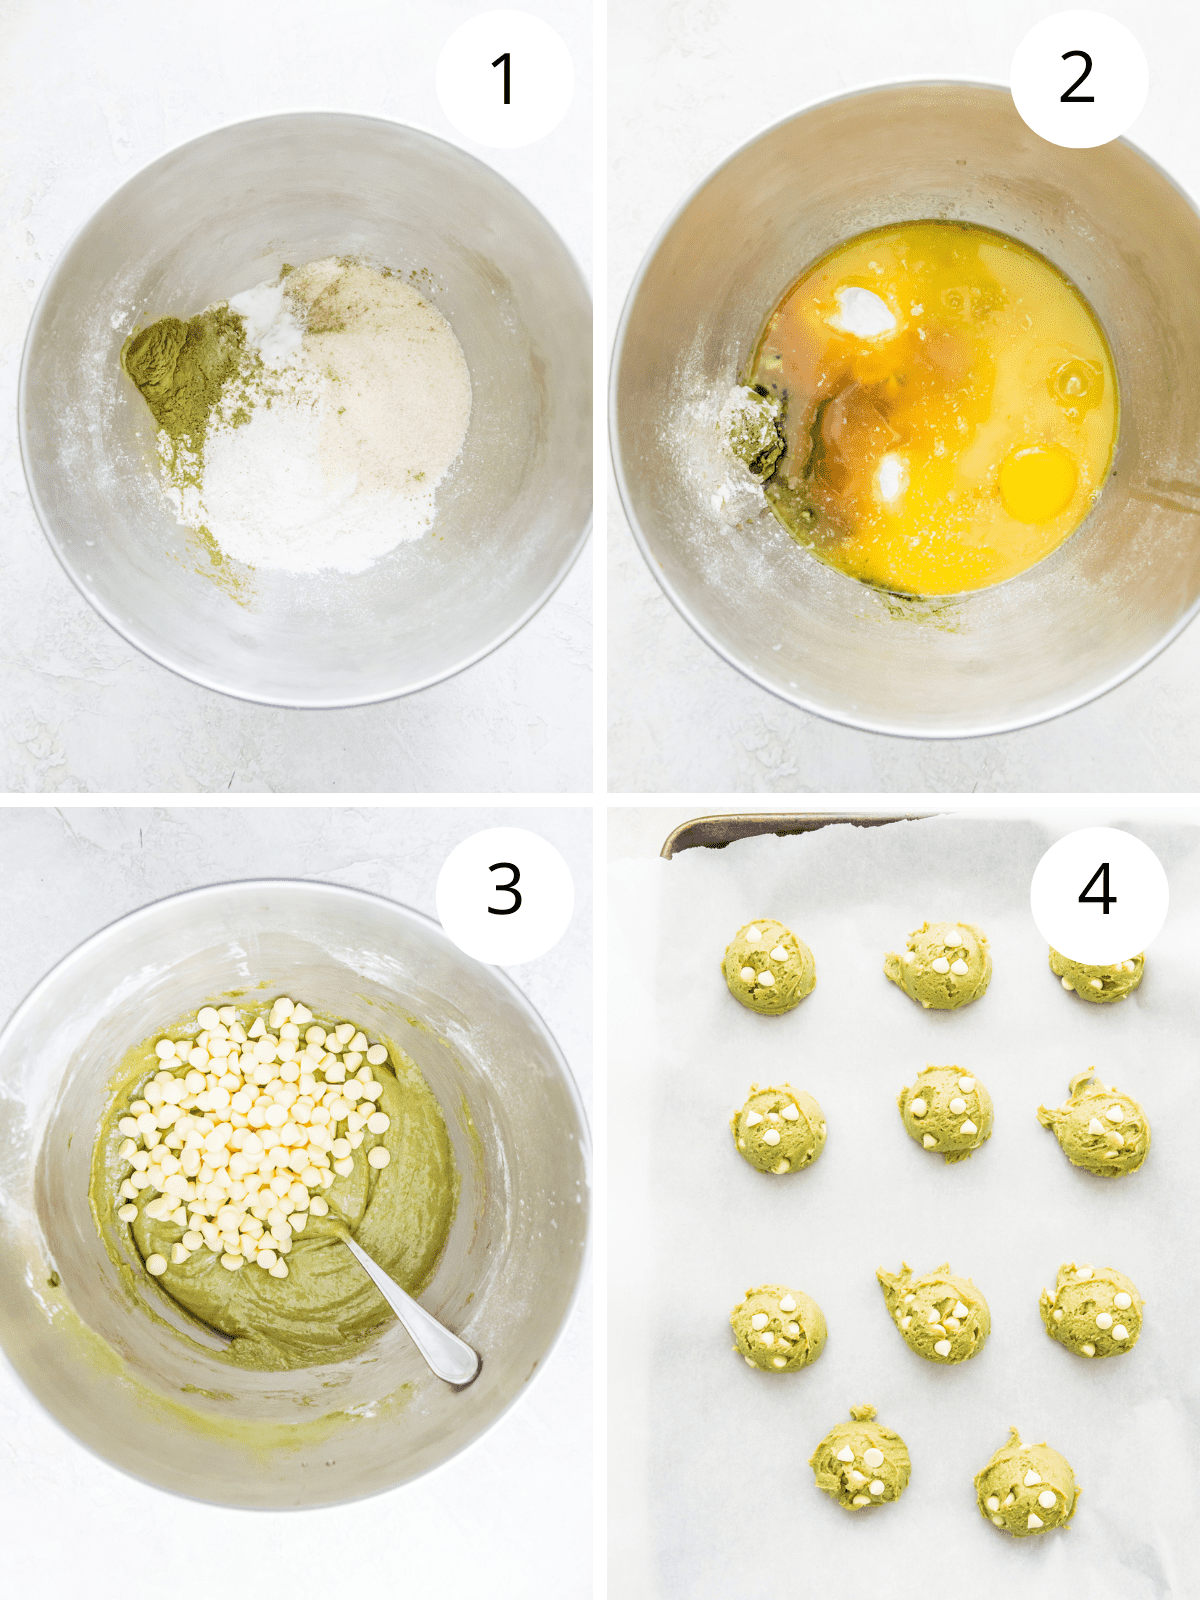 Step by step directions for making matcha cookies.